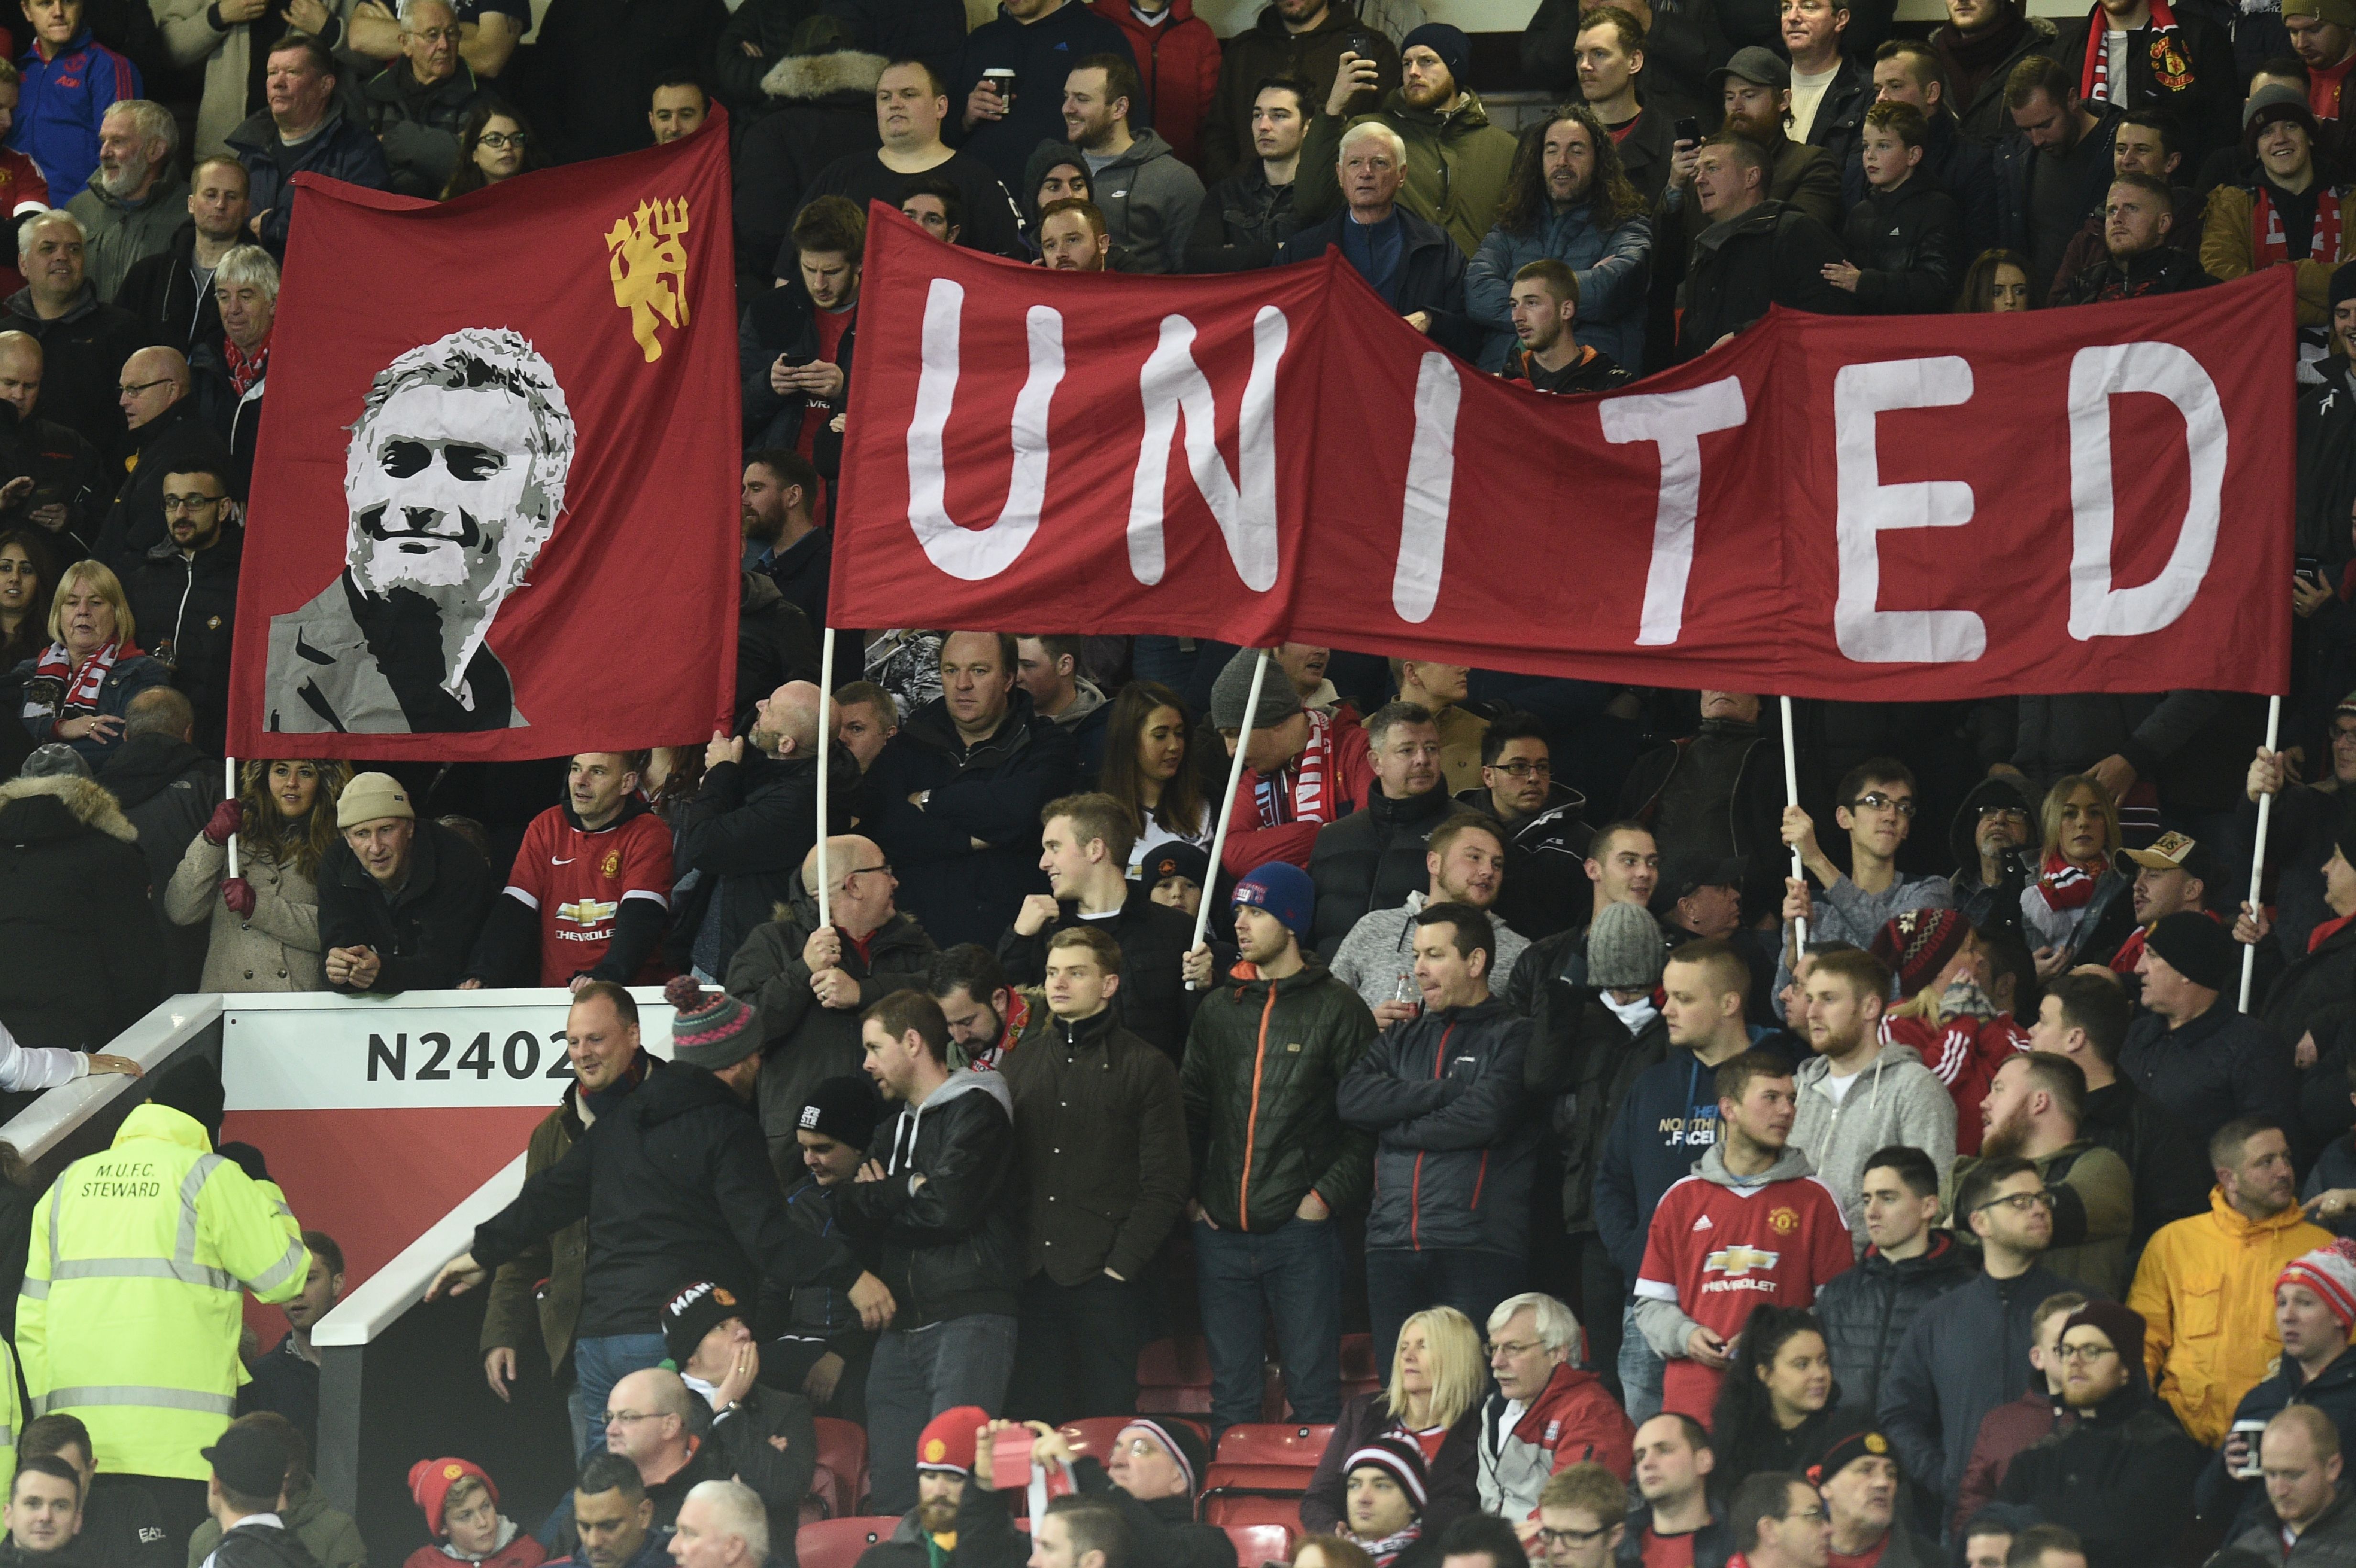 Manchester United banners are seen in the crowd during the English Premier League football match between Manchester United and West Ham United at Old Trafford in Manchester, north west England, on November 27, 2016. / AFP / Oli SCARFF / RESTRICTED TO EDITORIAL USE. No use with unauthorized audio, video, data, fixture lists, club/league logos or 'live' services. Online in-match use limited to 75 images, no video emulation. No use in betting, games or single club/league/player publications.  /         (Photo credit should read OLI SCARFF/AFP/Getty Images)